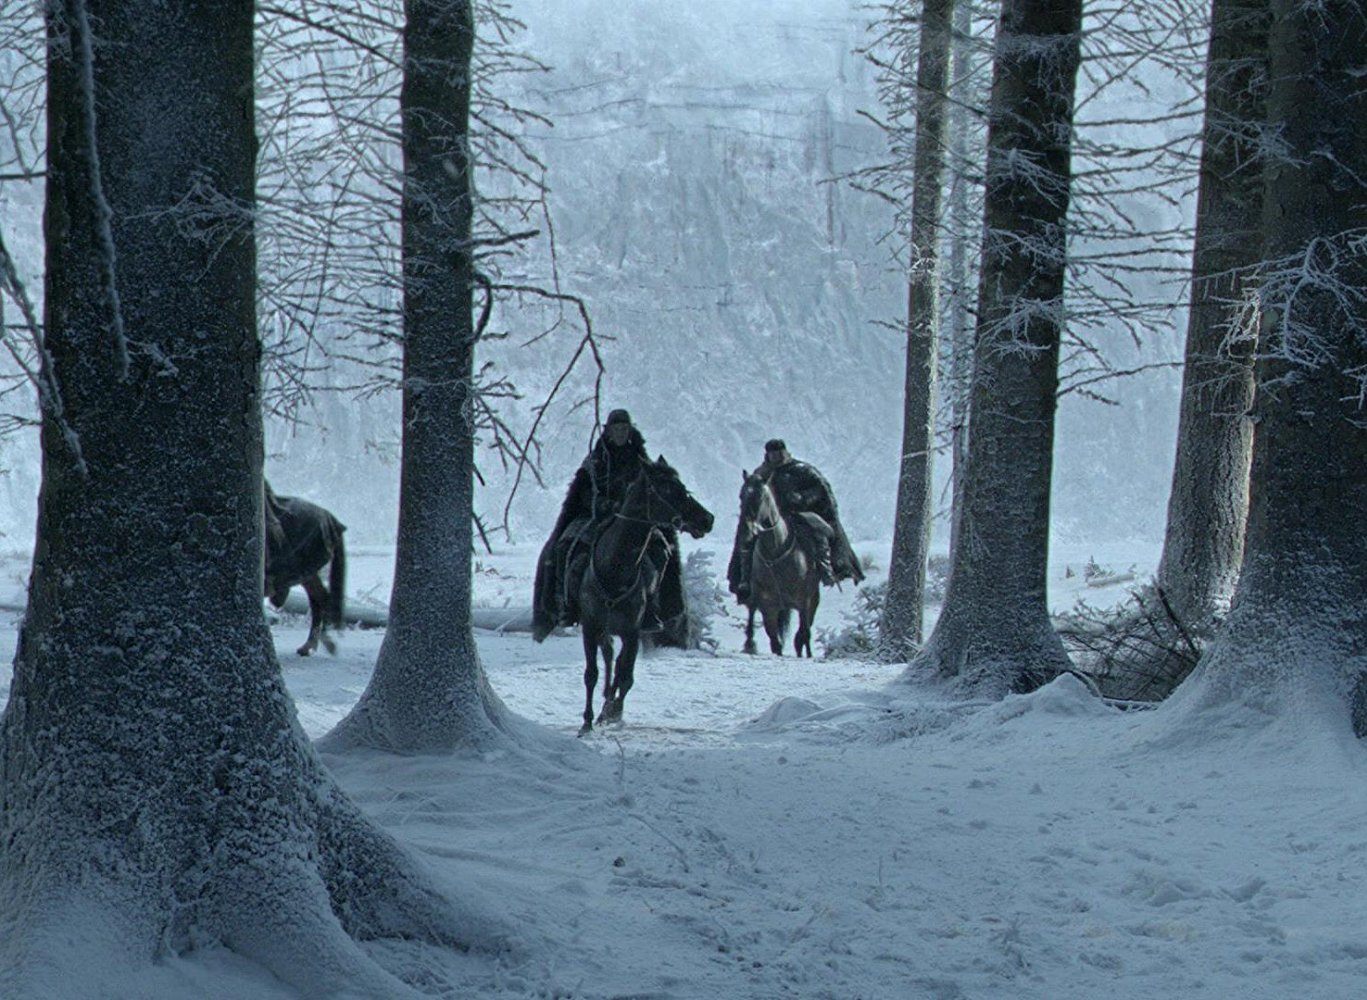 Men riding horses in the woods where snow has fallen.